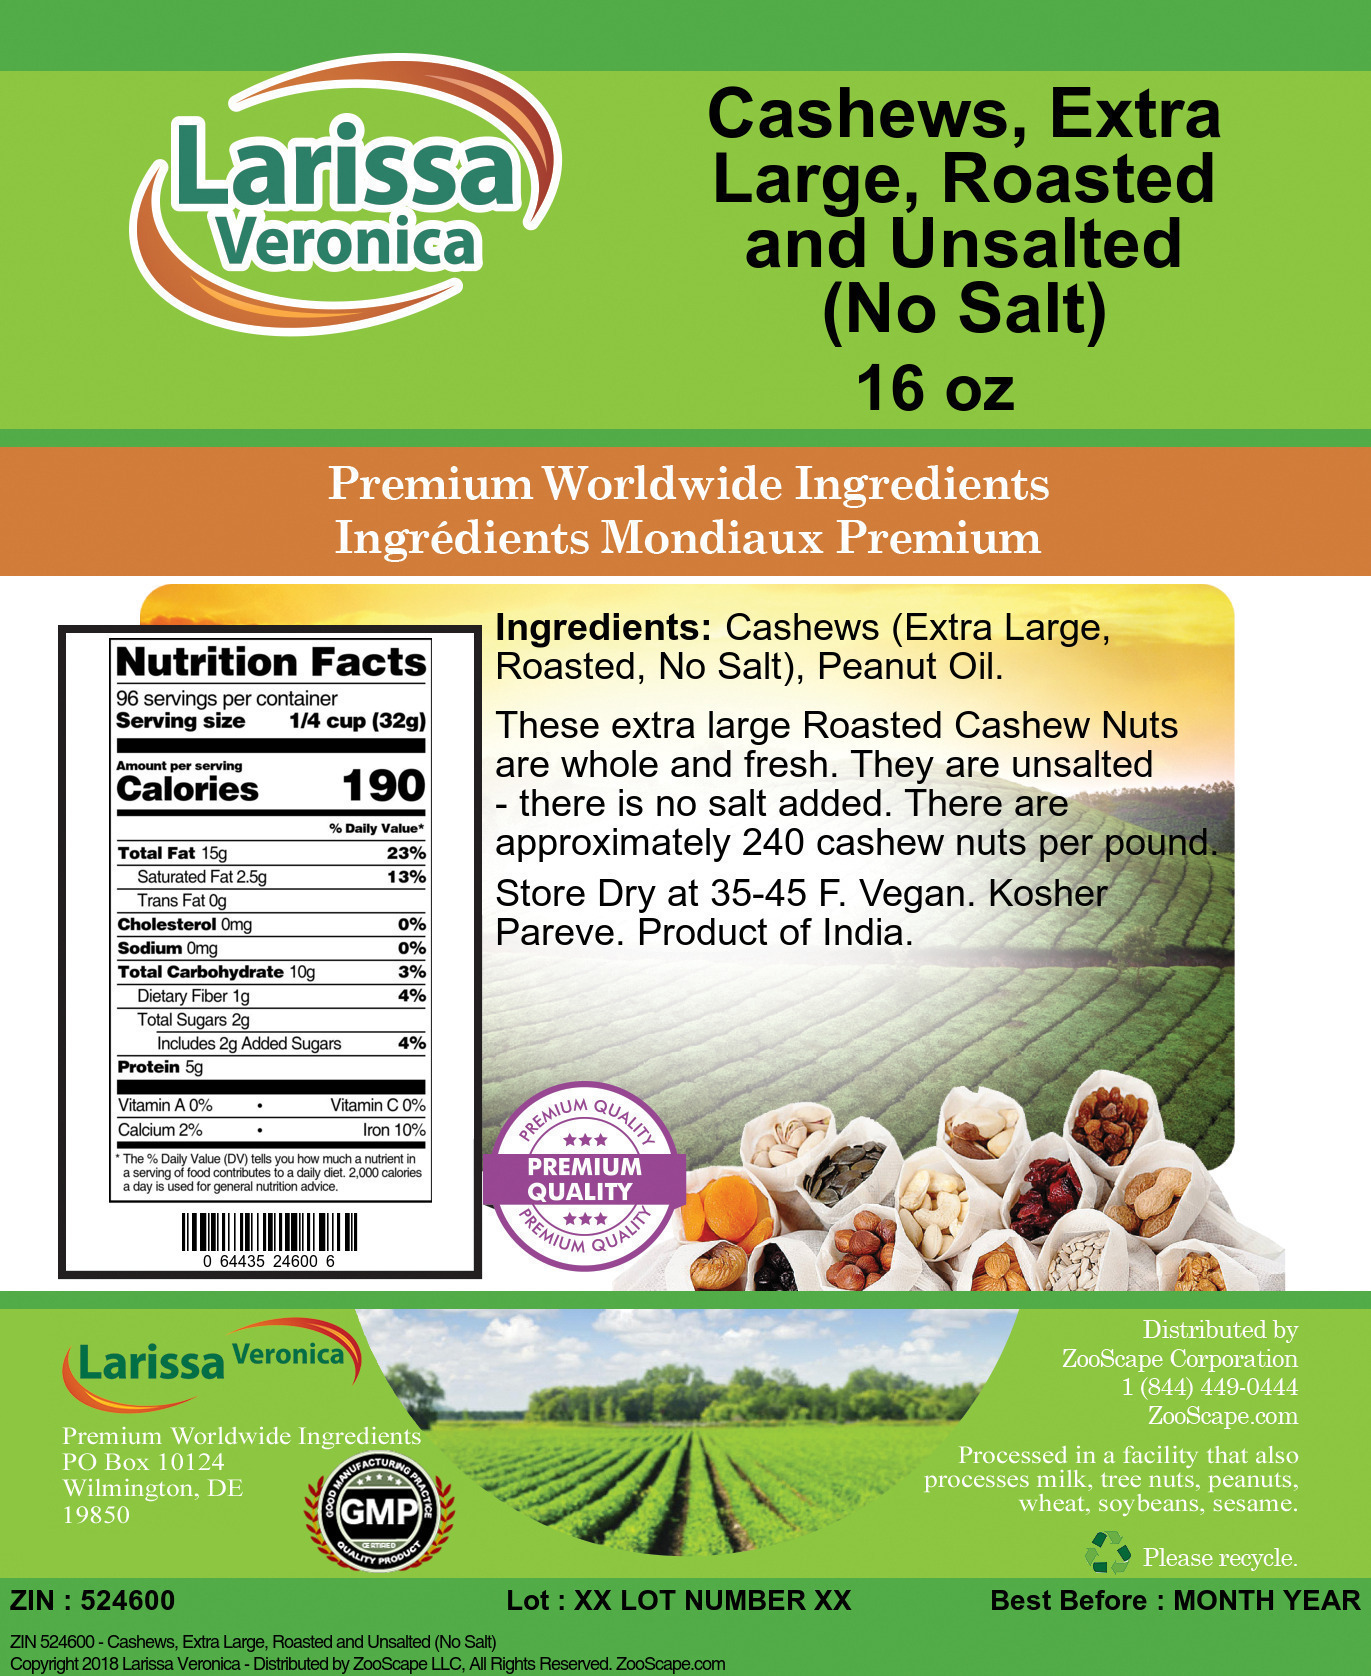 Cashews, Extra Large, Roasted and Unsalted (No Salt) - Label